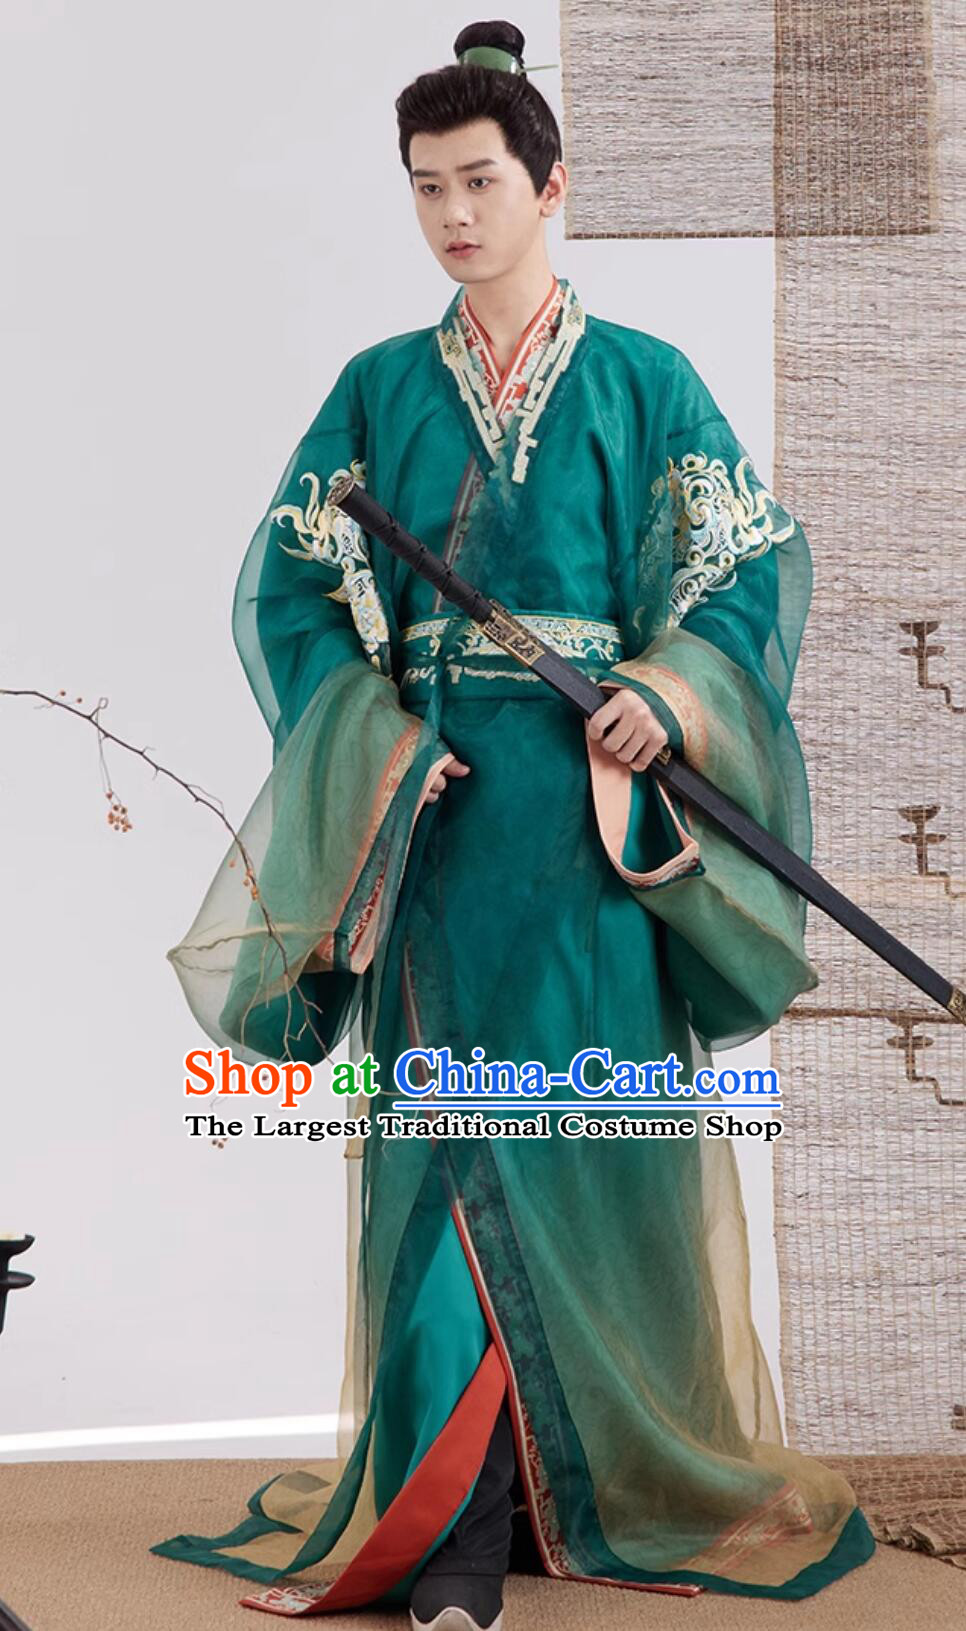 Ancient China Noble Childe Costume Chinese Warring States Time Swordsman Clothing Traditional Green Hanfu Robe